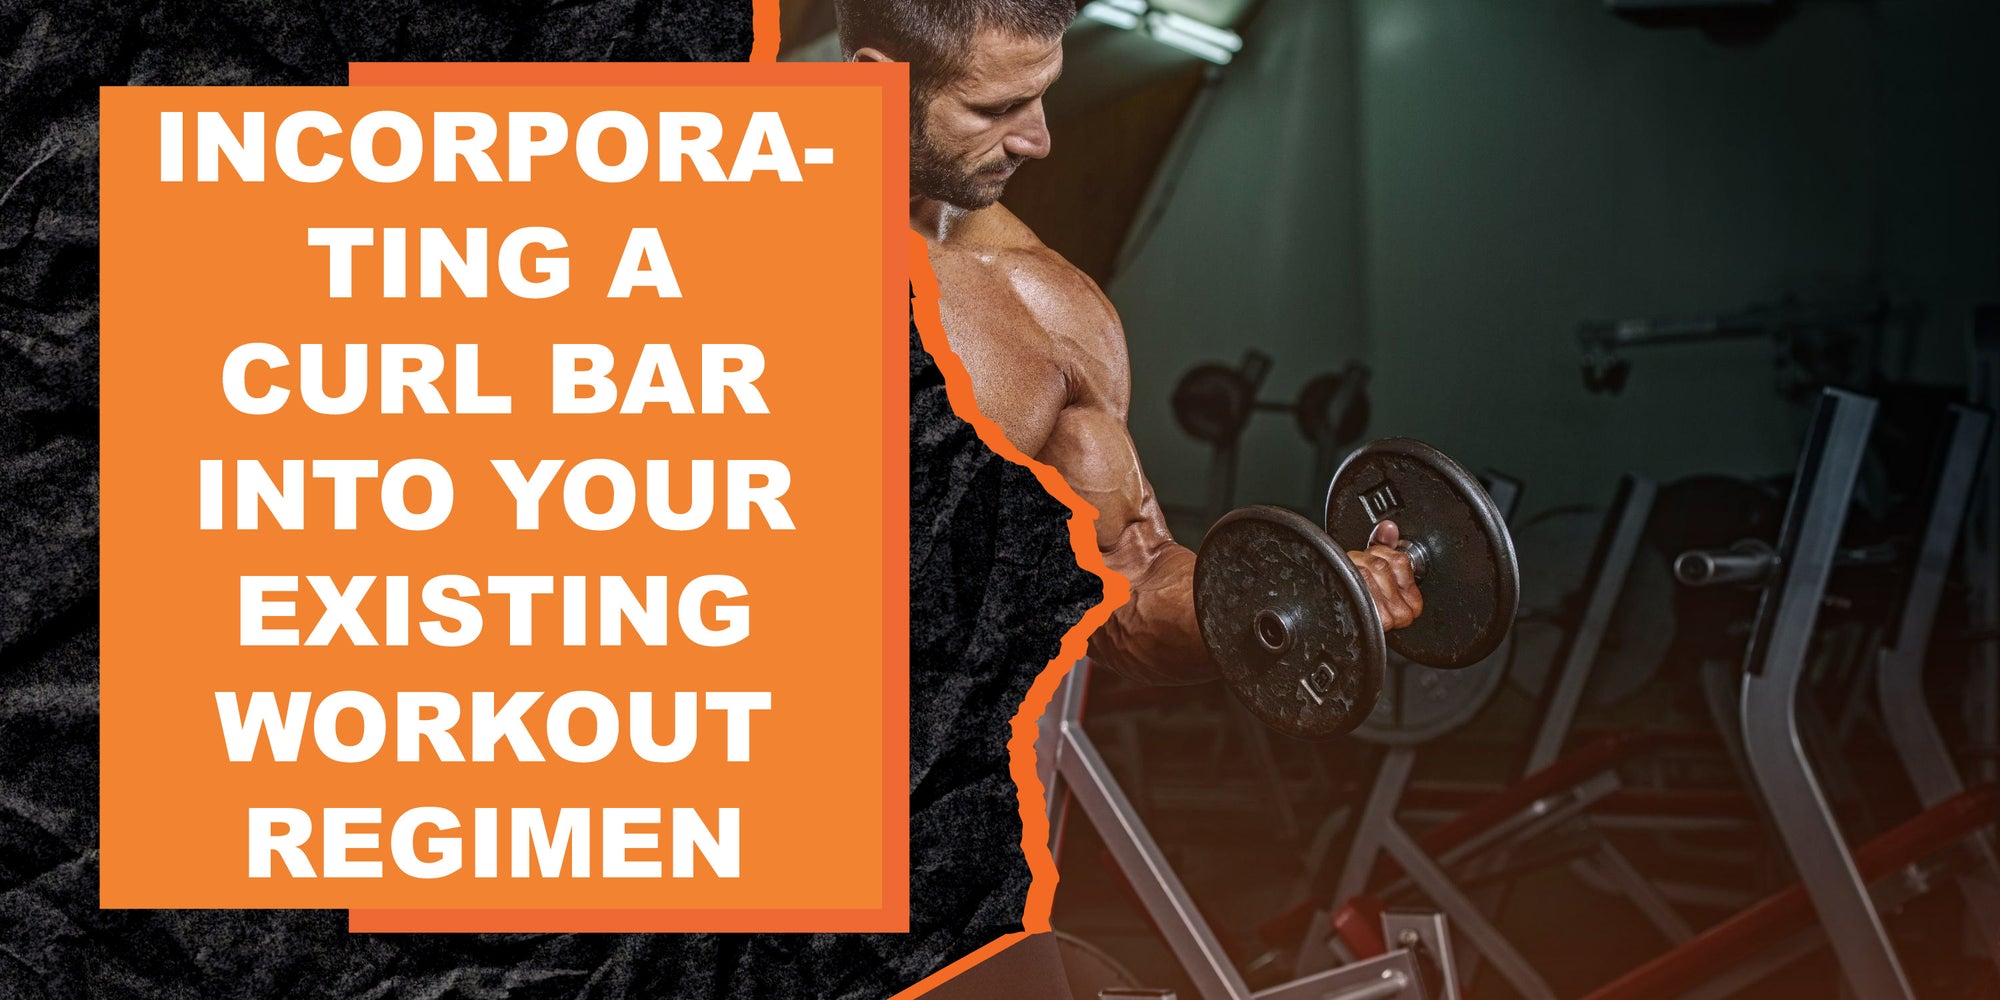 Incorporating a Curl Bar Into Your Existing Workout Regimen